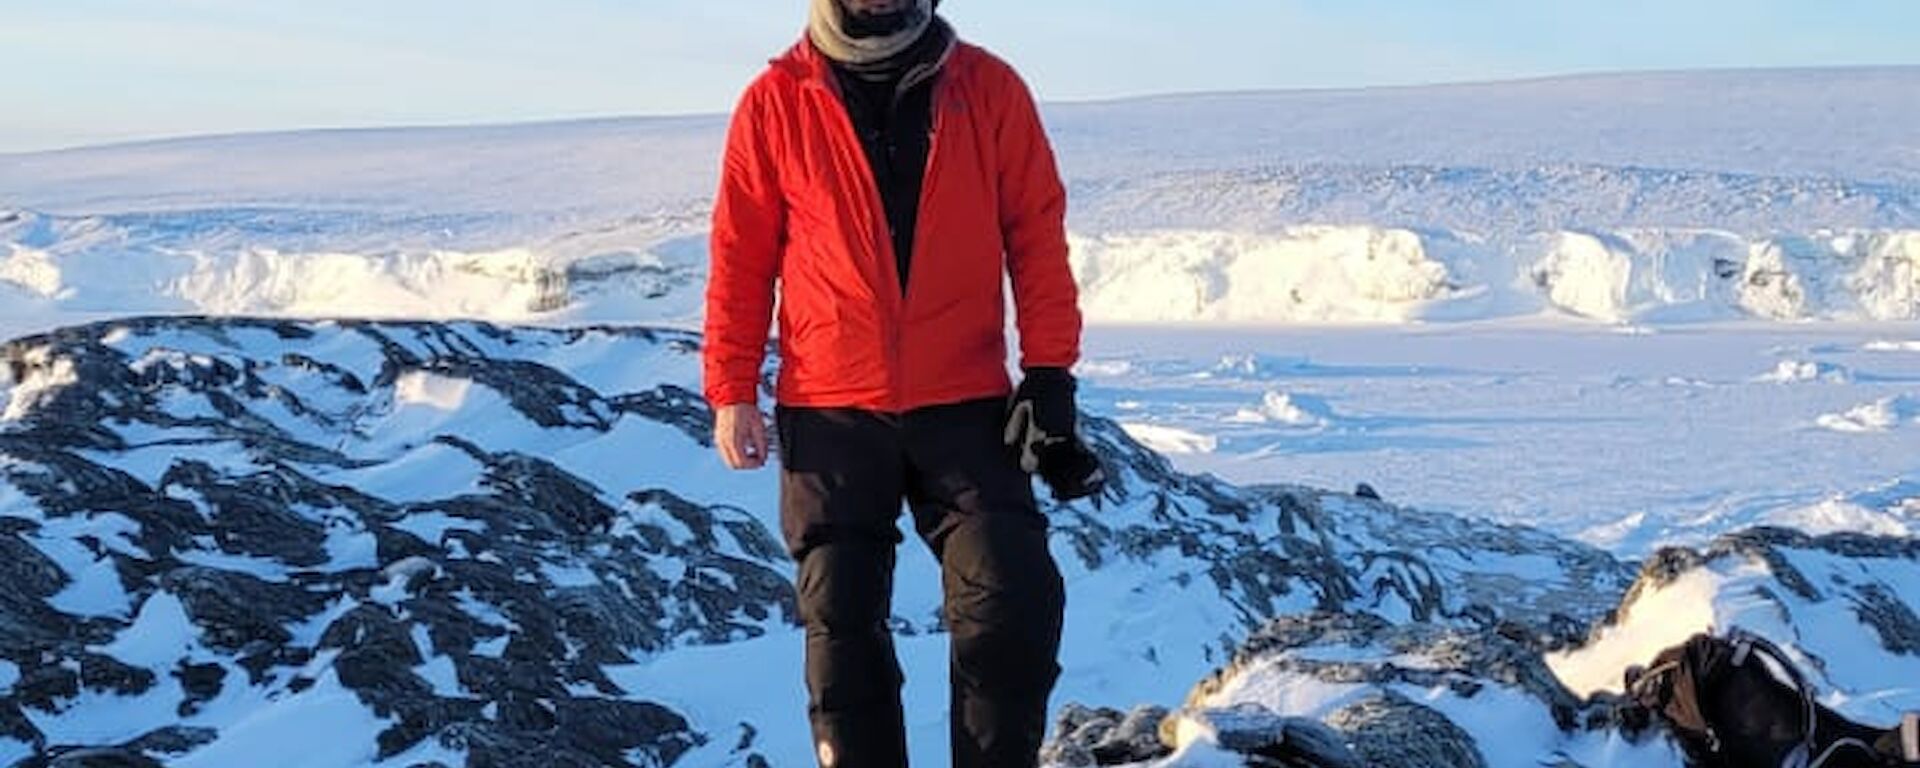 A man in a red jacket and beanie stands atop a snow covered rocky outcrop. In the distant background is the ice face of the shoreline. The sky is clear and blue.